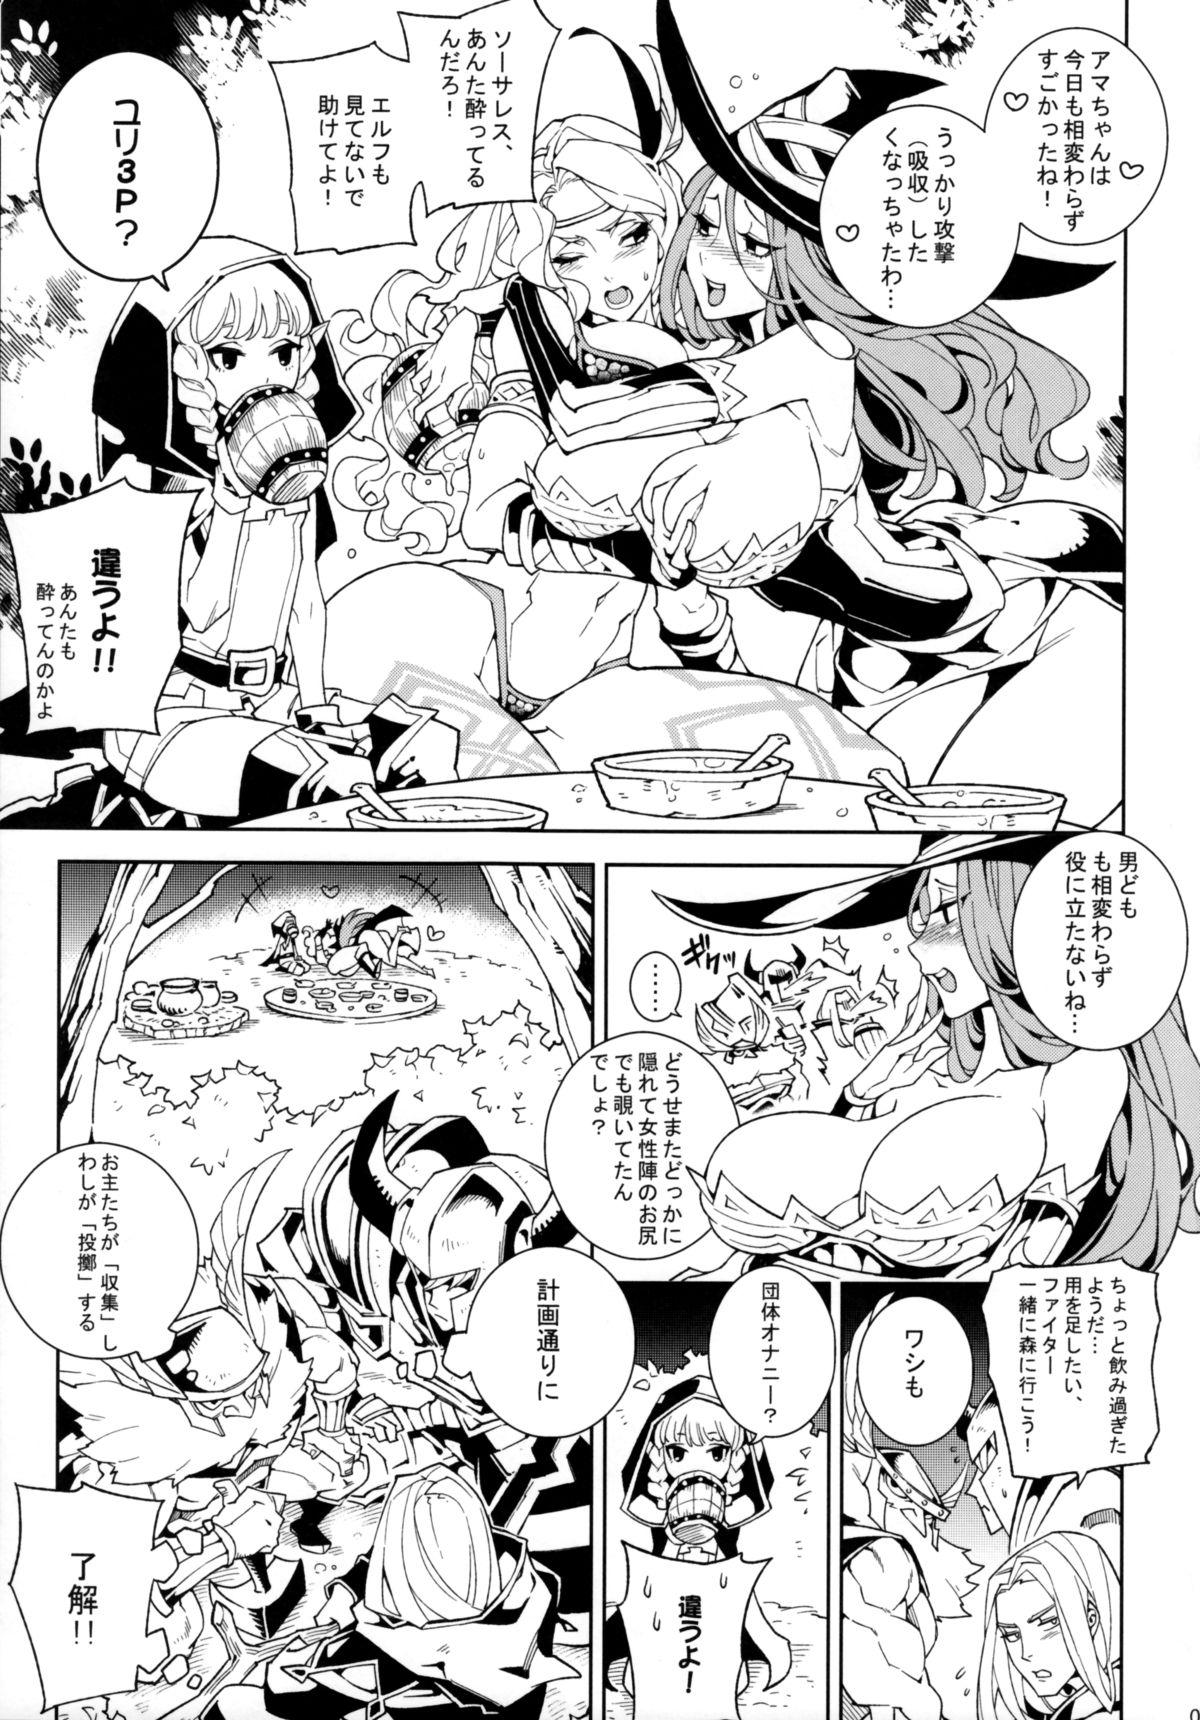 Creampies Dragon Cream!! - Dragons crown Messy - Page 4